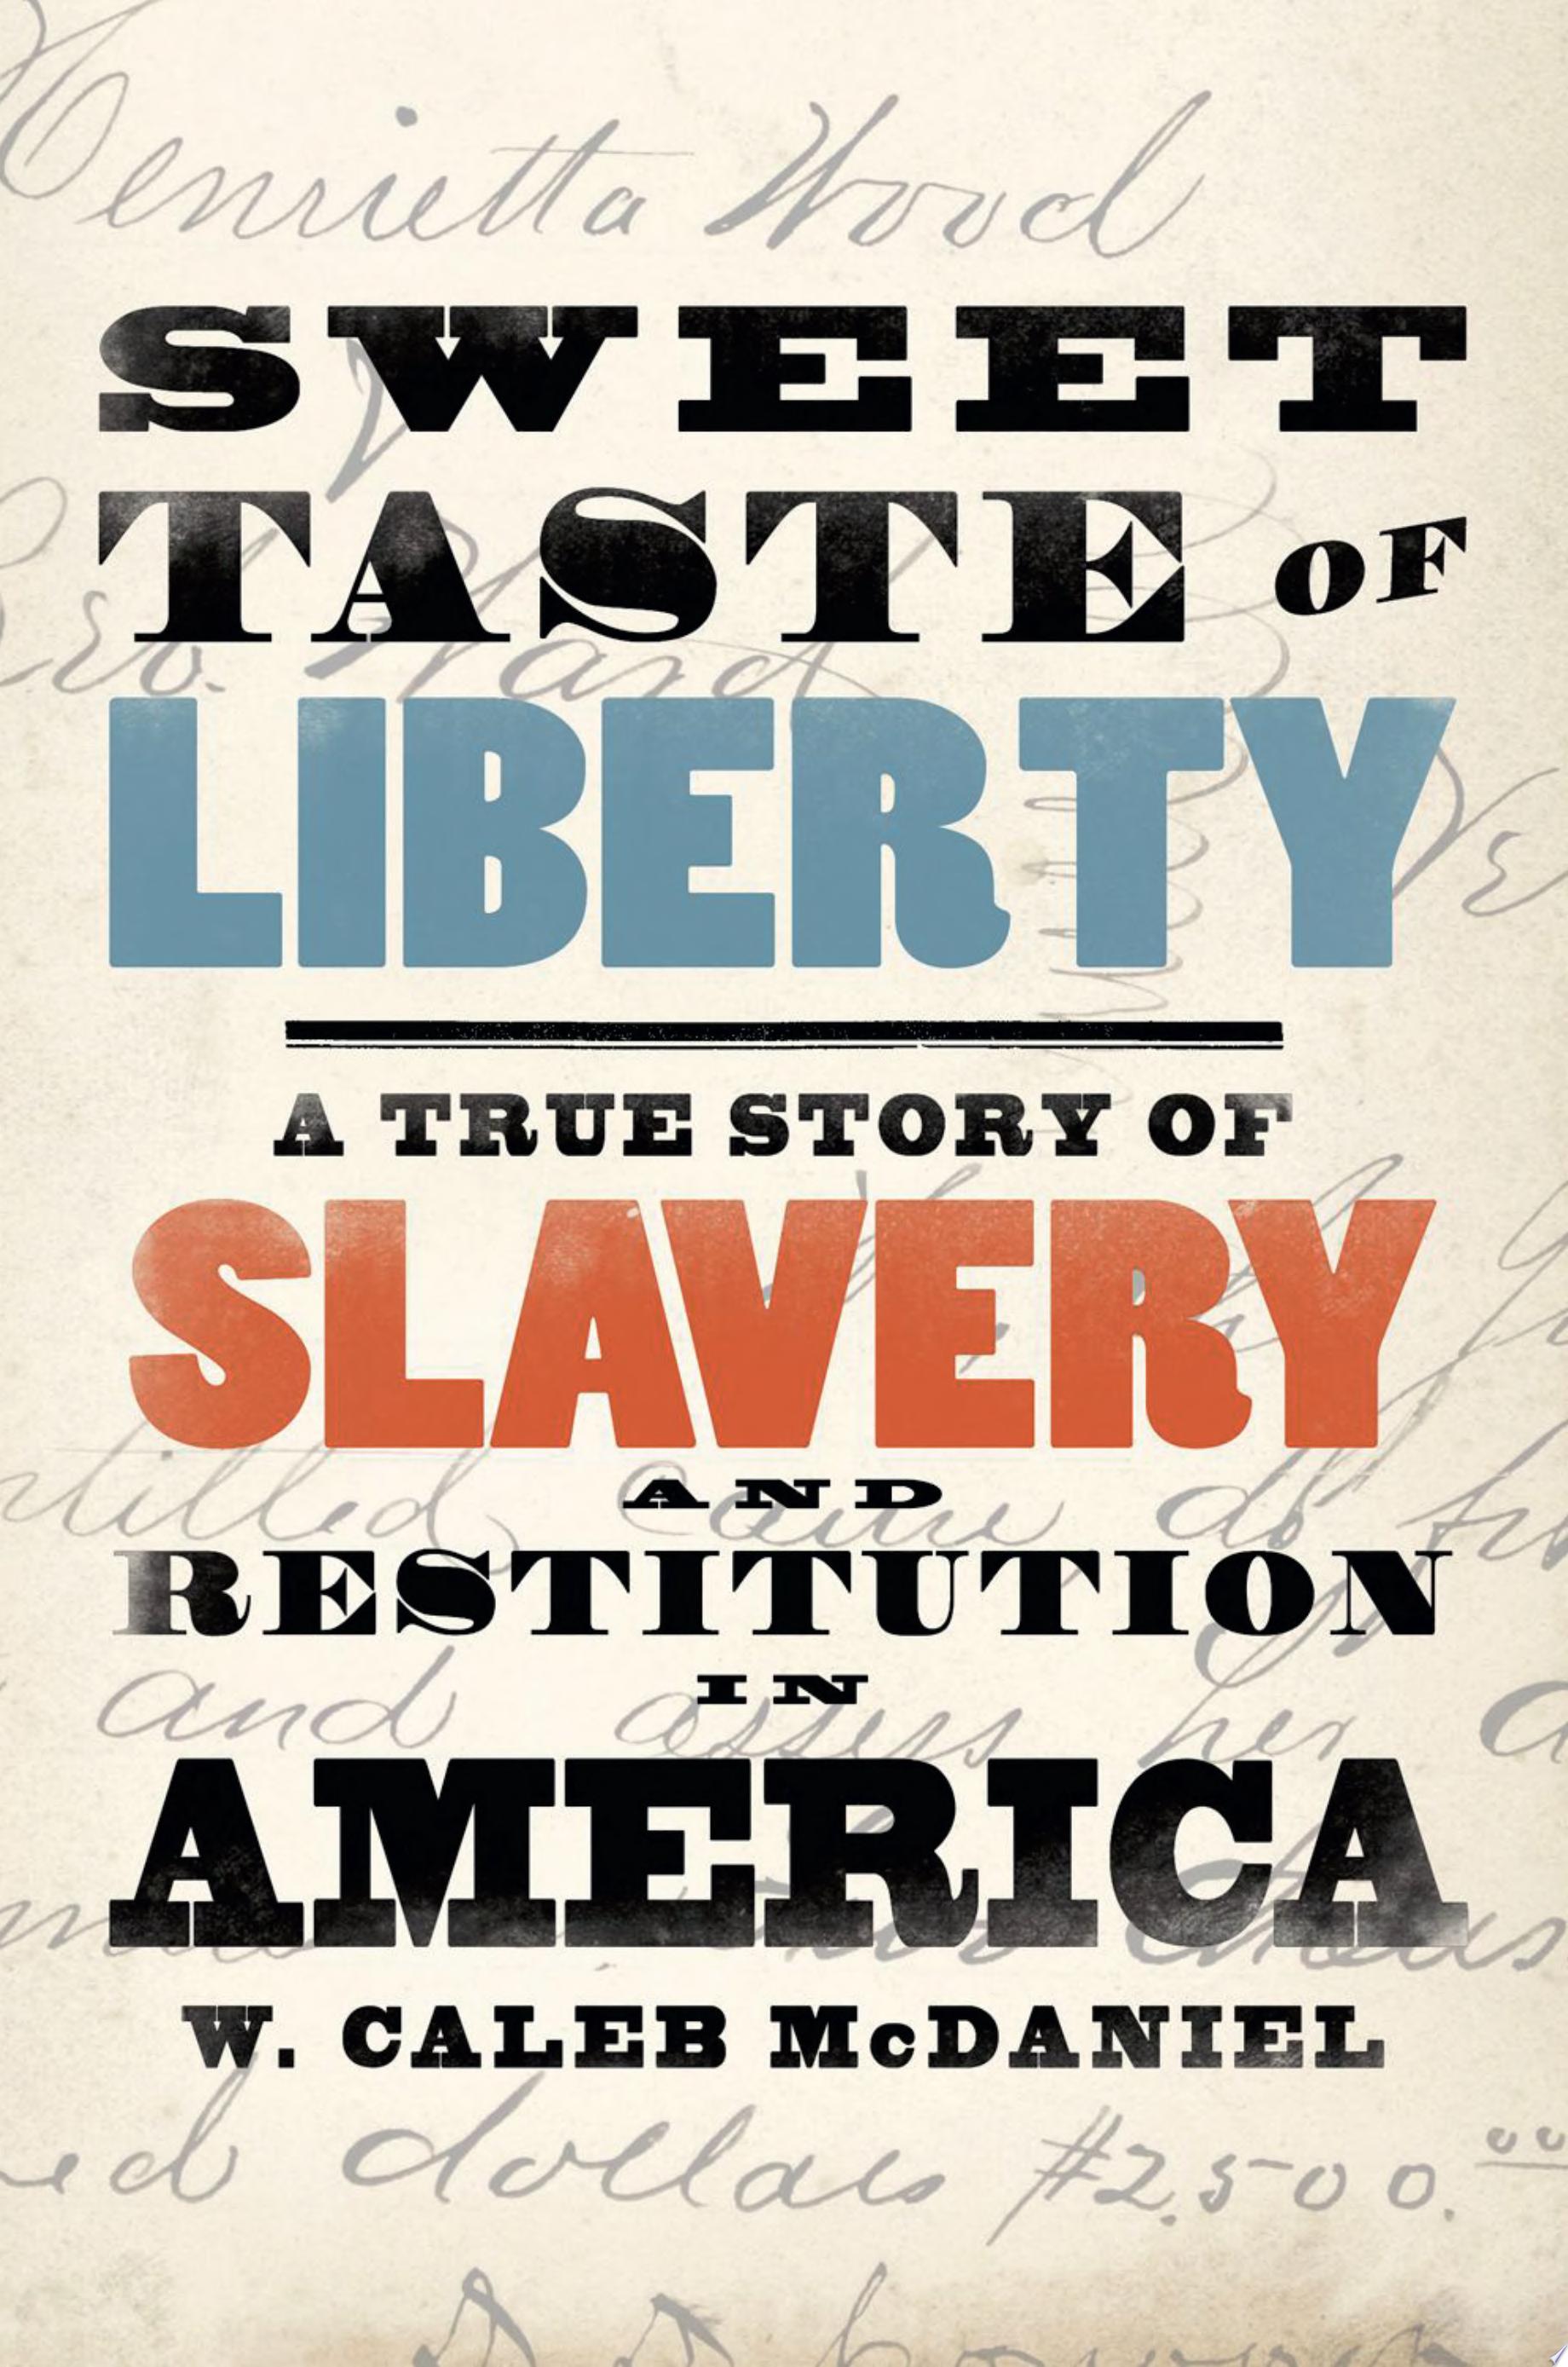 Image for "Sweet Taste of Liberty"